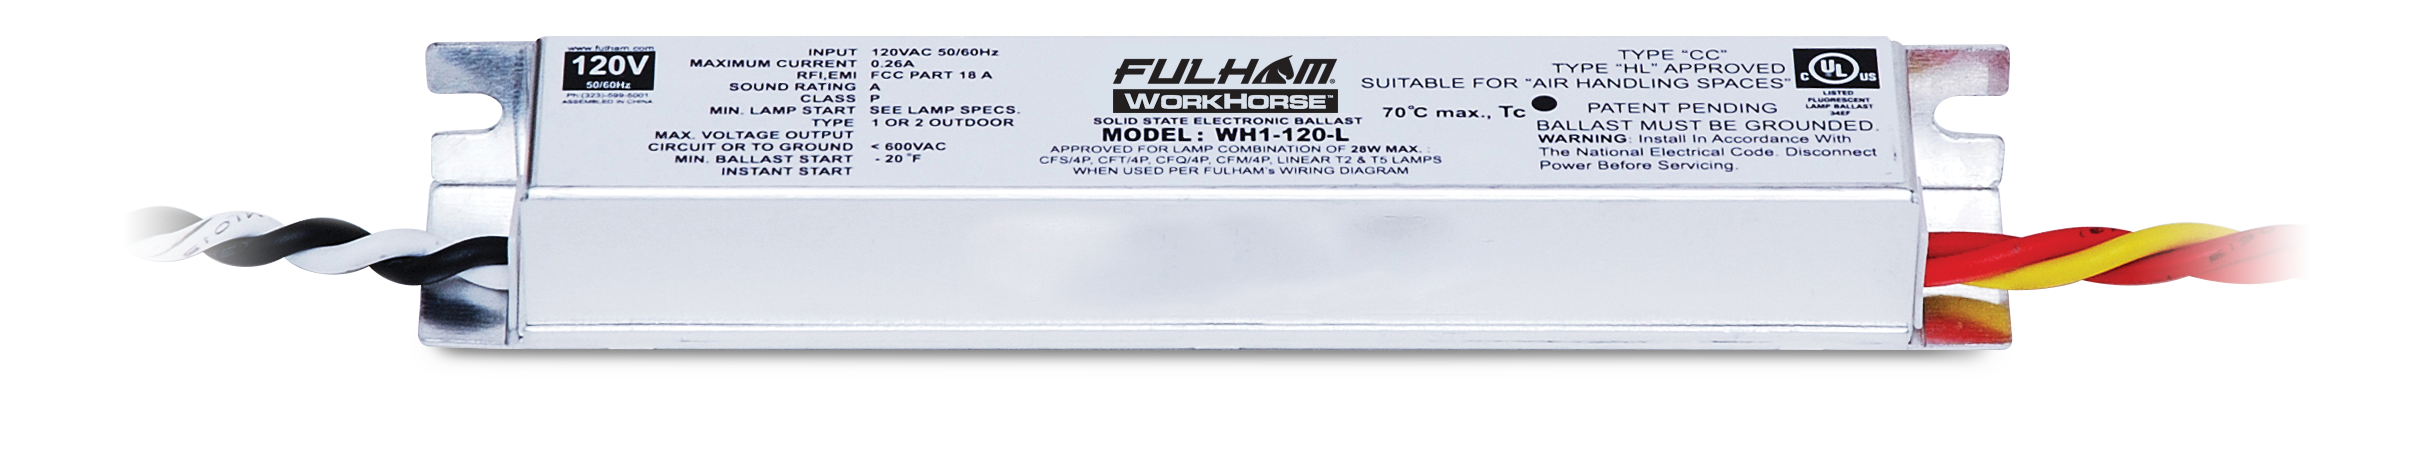 Fulham Workhorse Instant Start Electronic Fluorescent Ballast For (1) F21T5 Lamp 120V #ANSI C82.11 (WH1-120-L)